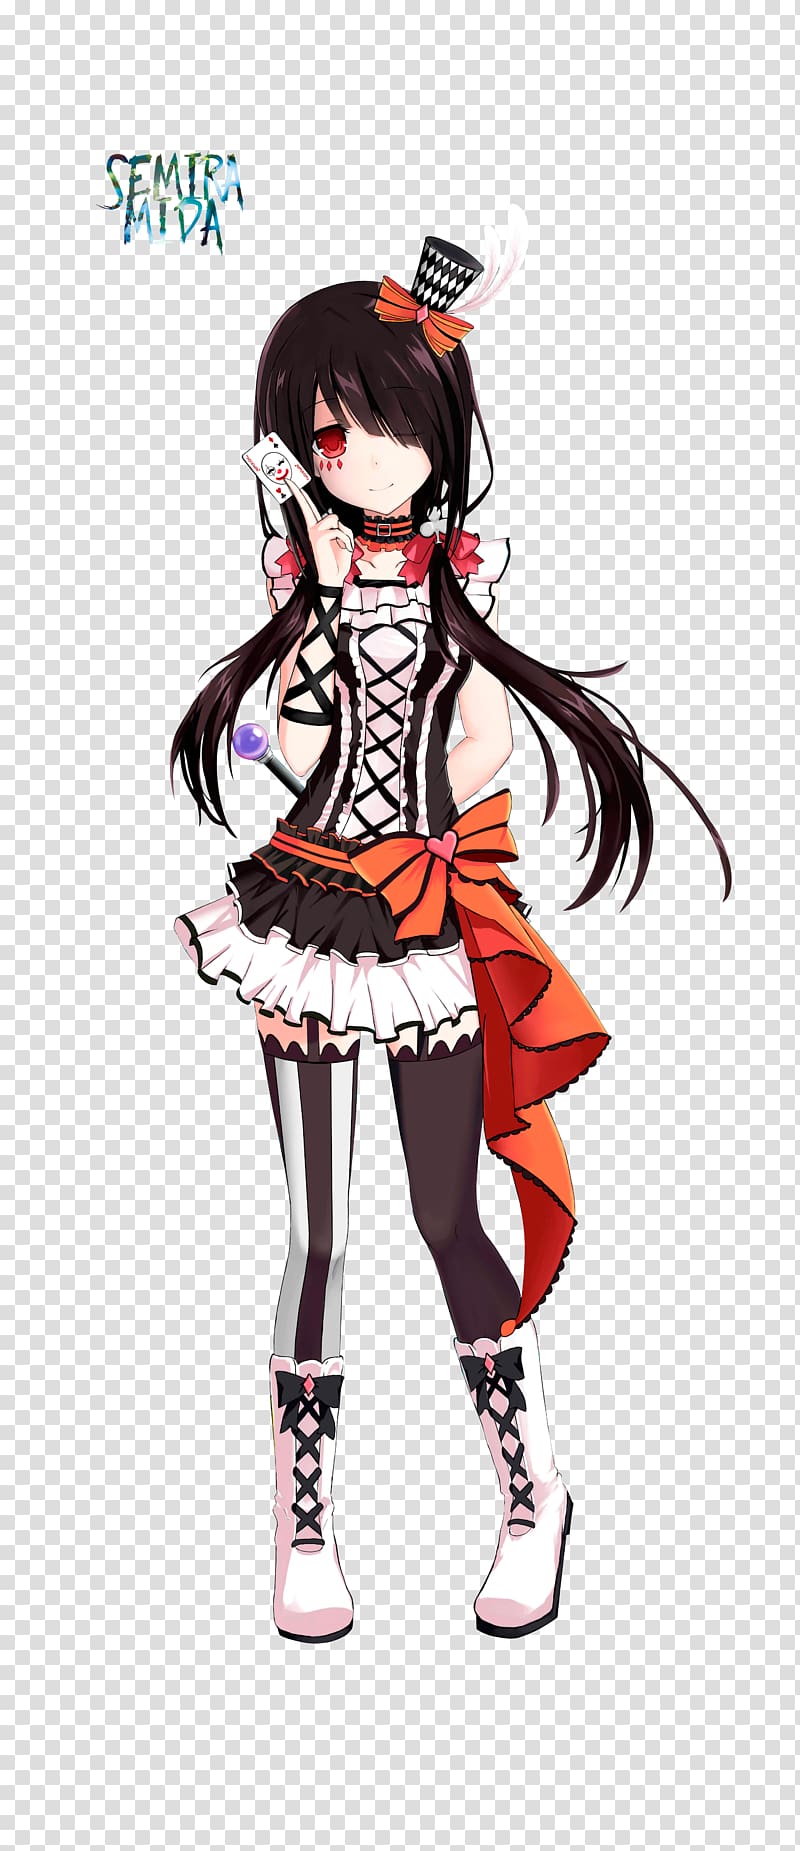 Rendering Date A Live Anime Manga, Randeer transparent background PNG clipart